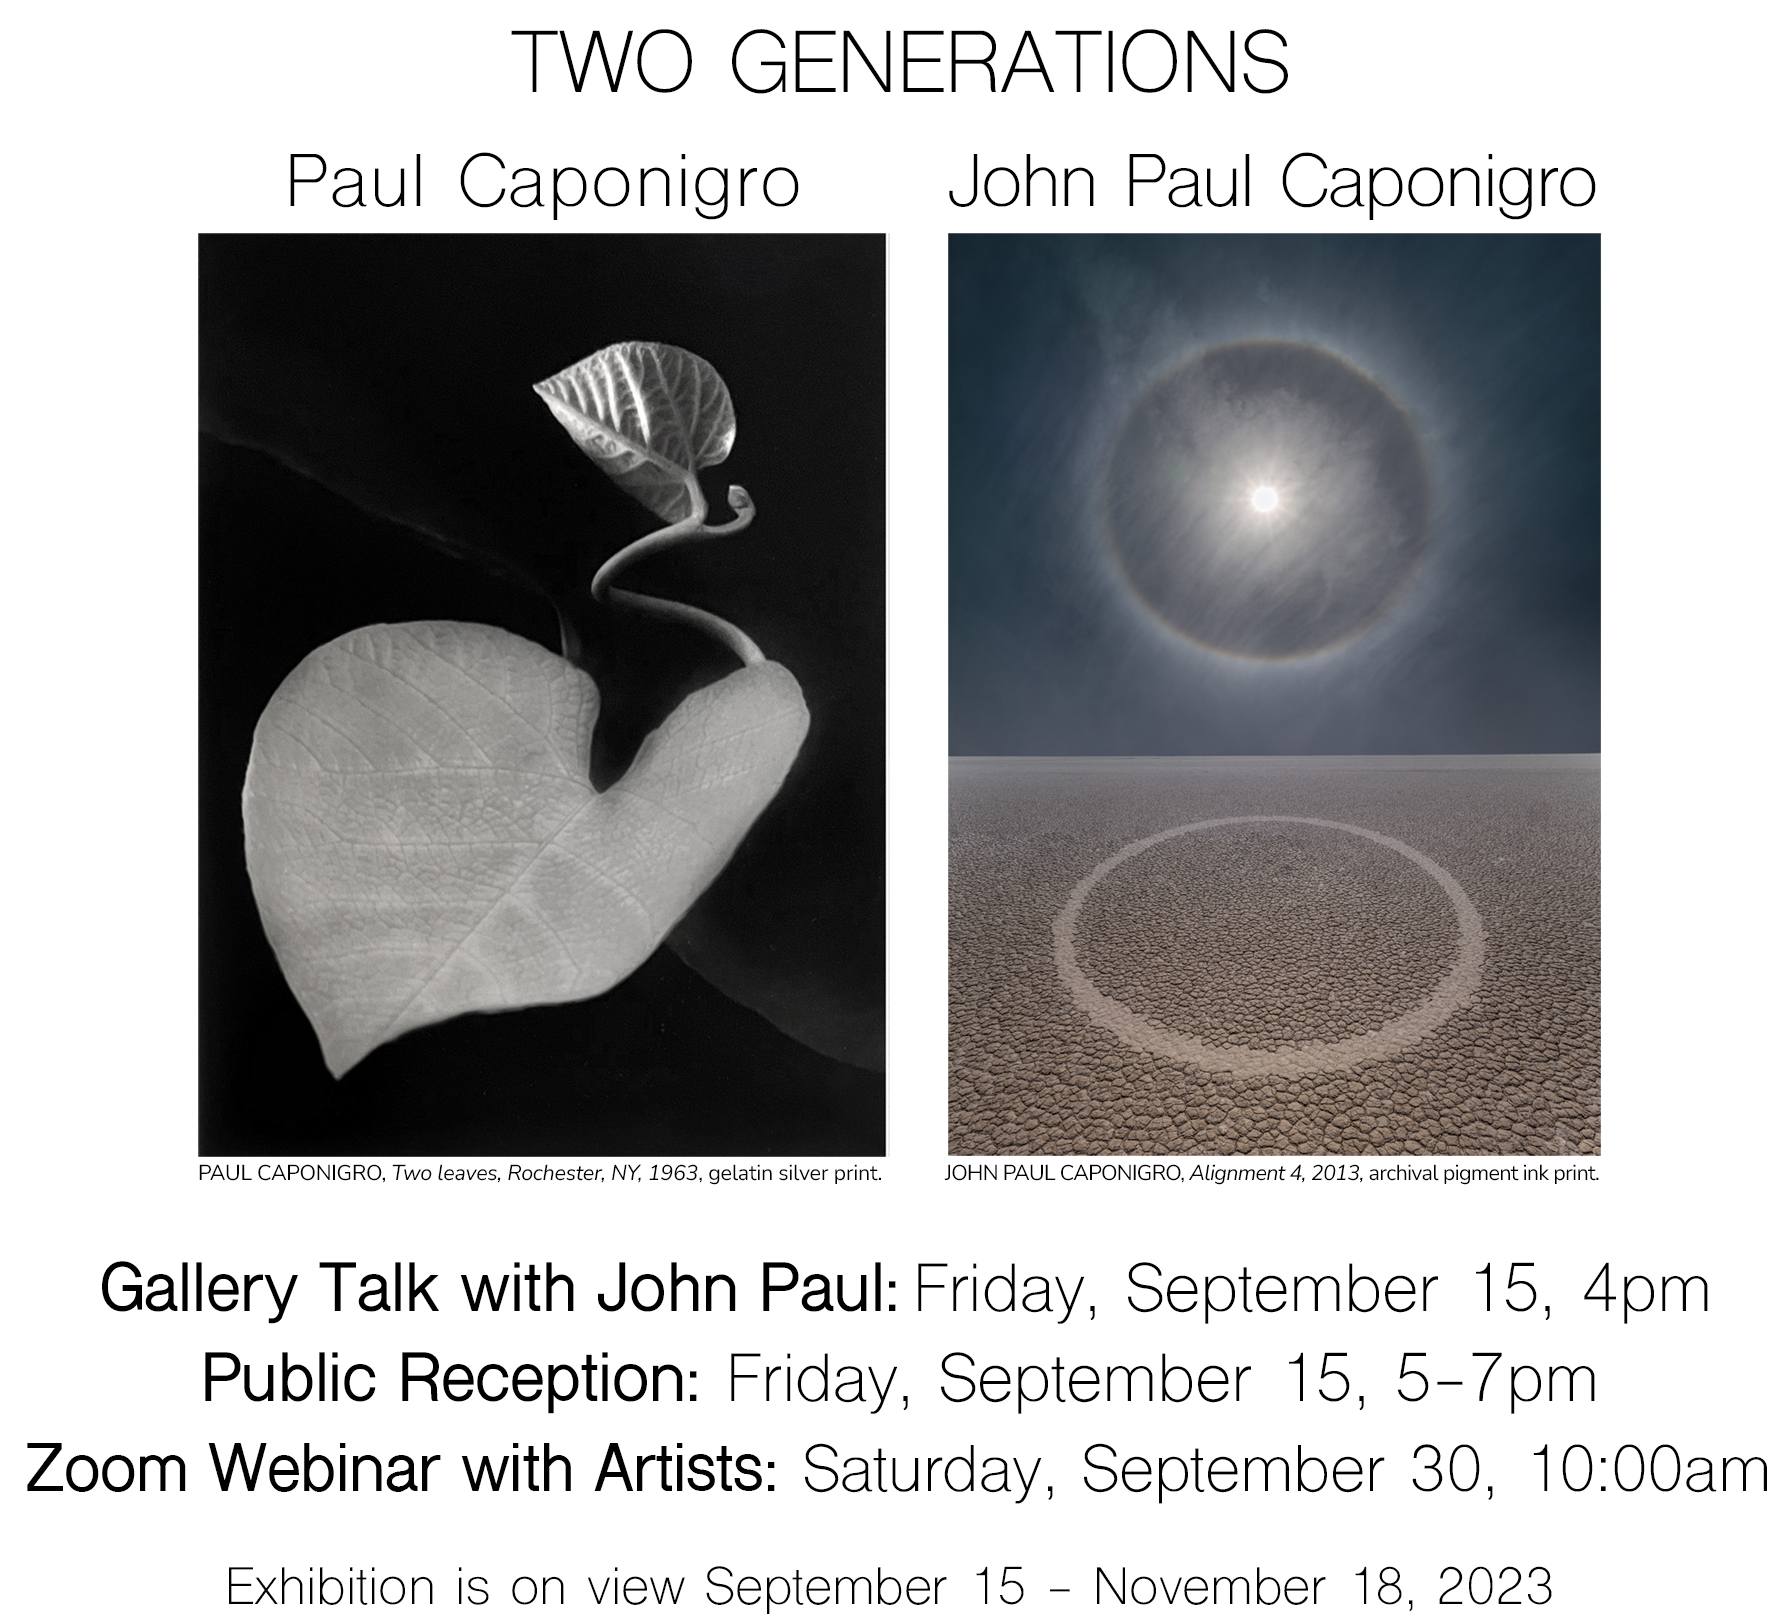 Two Generations - Paul Caponigro and John Paul Caponigro. Artists Reception September 15, 5-7pm